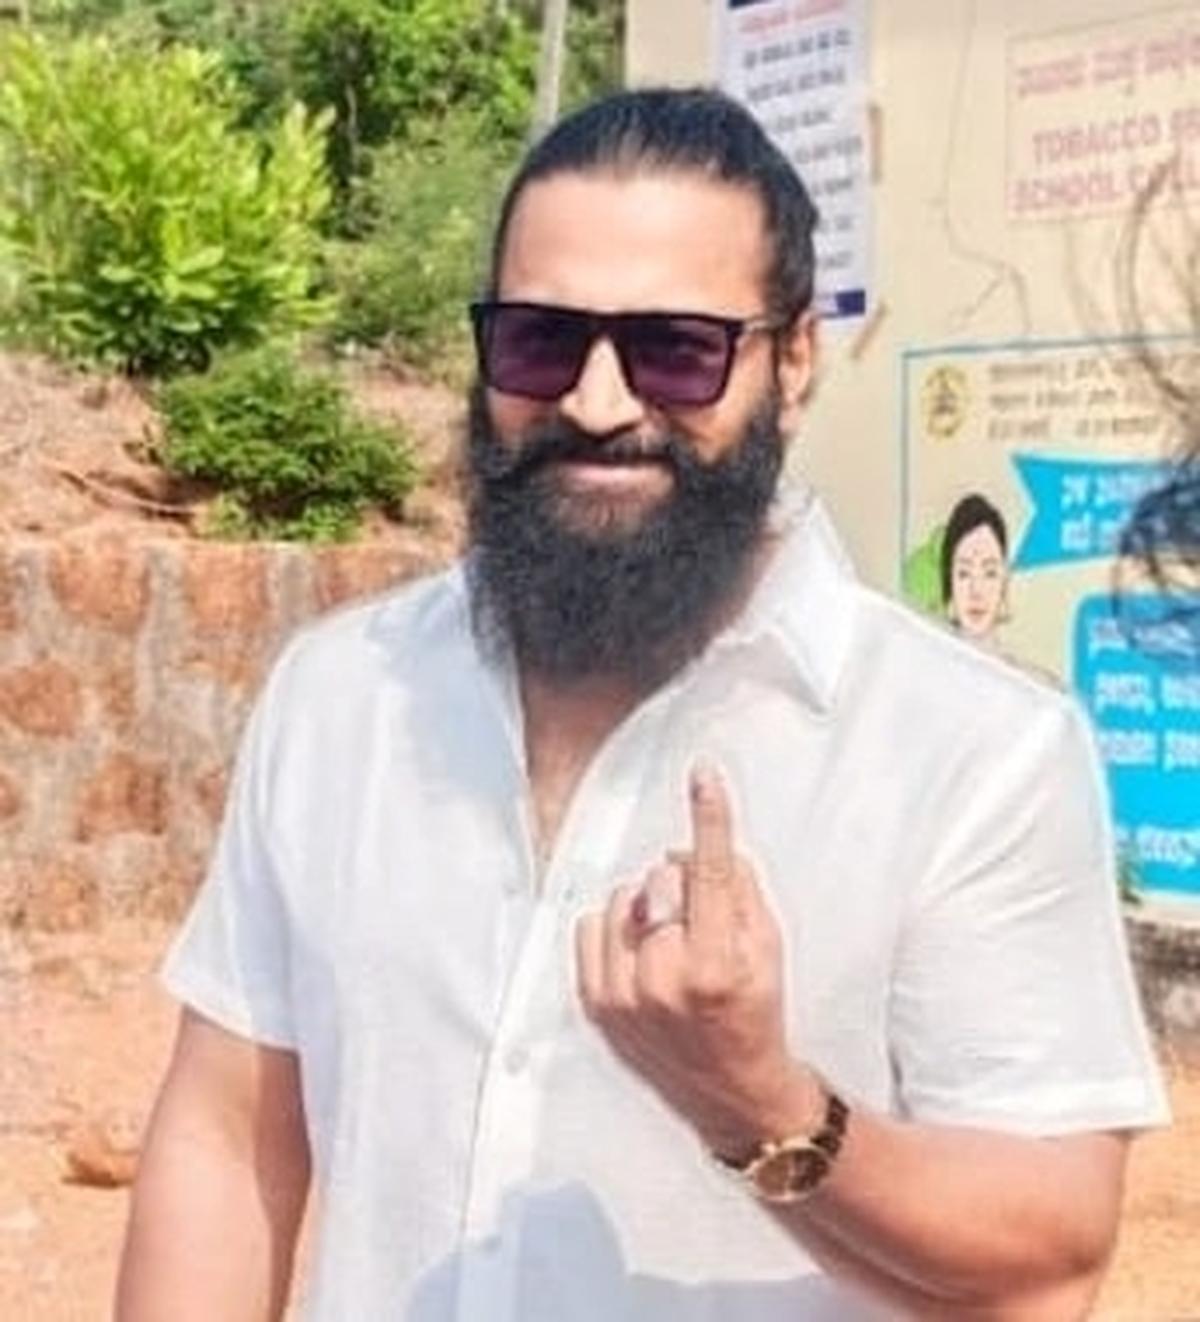 Actor Rishabh Shetty after he cast his vote at a polling station at Keradi village in Byndoor Assembly Constituency, Udupi on Tuesday.